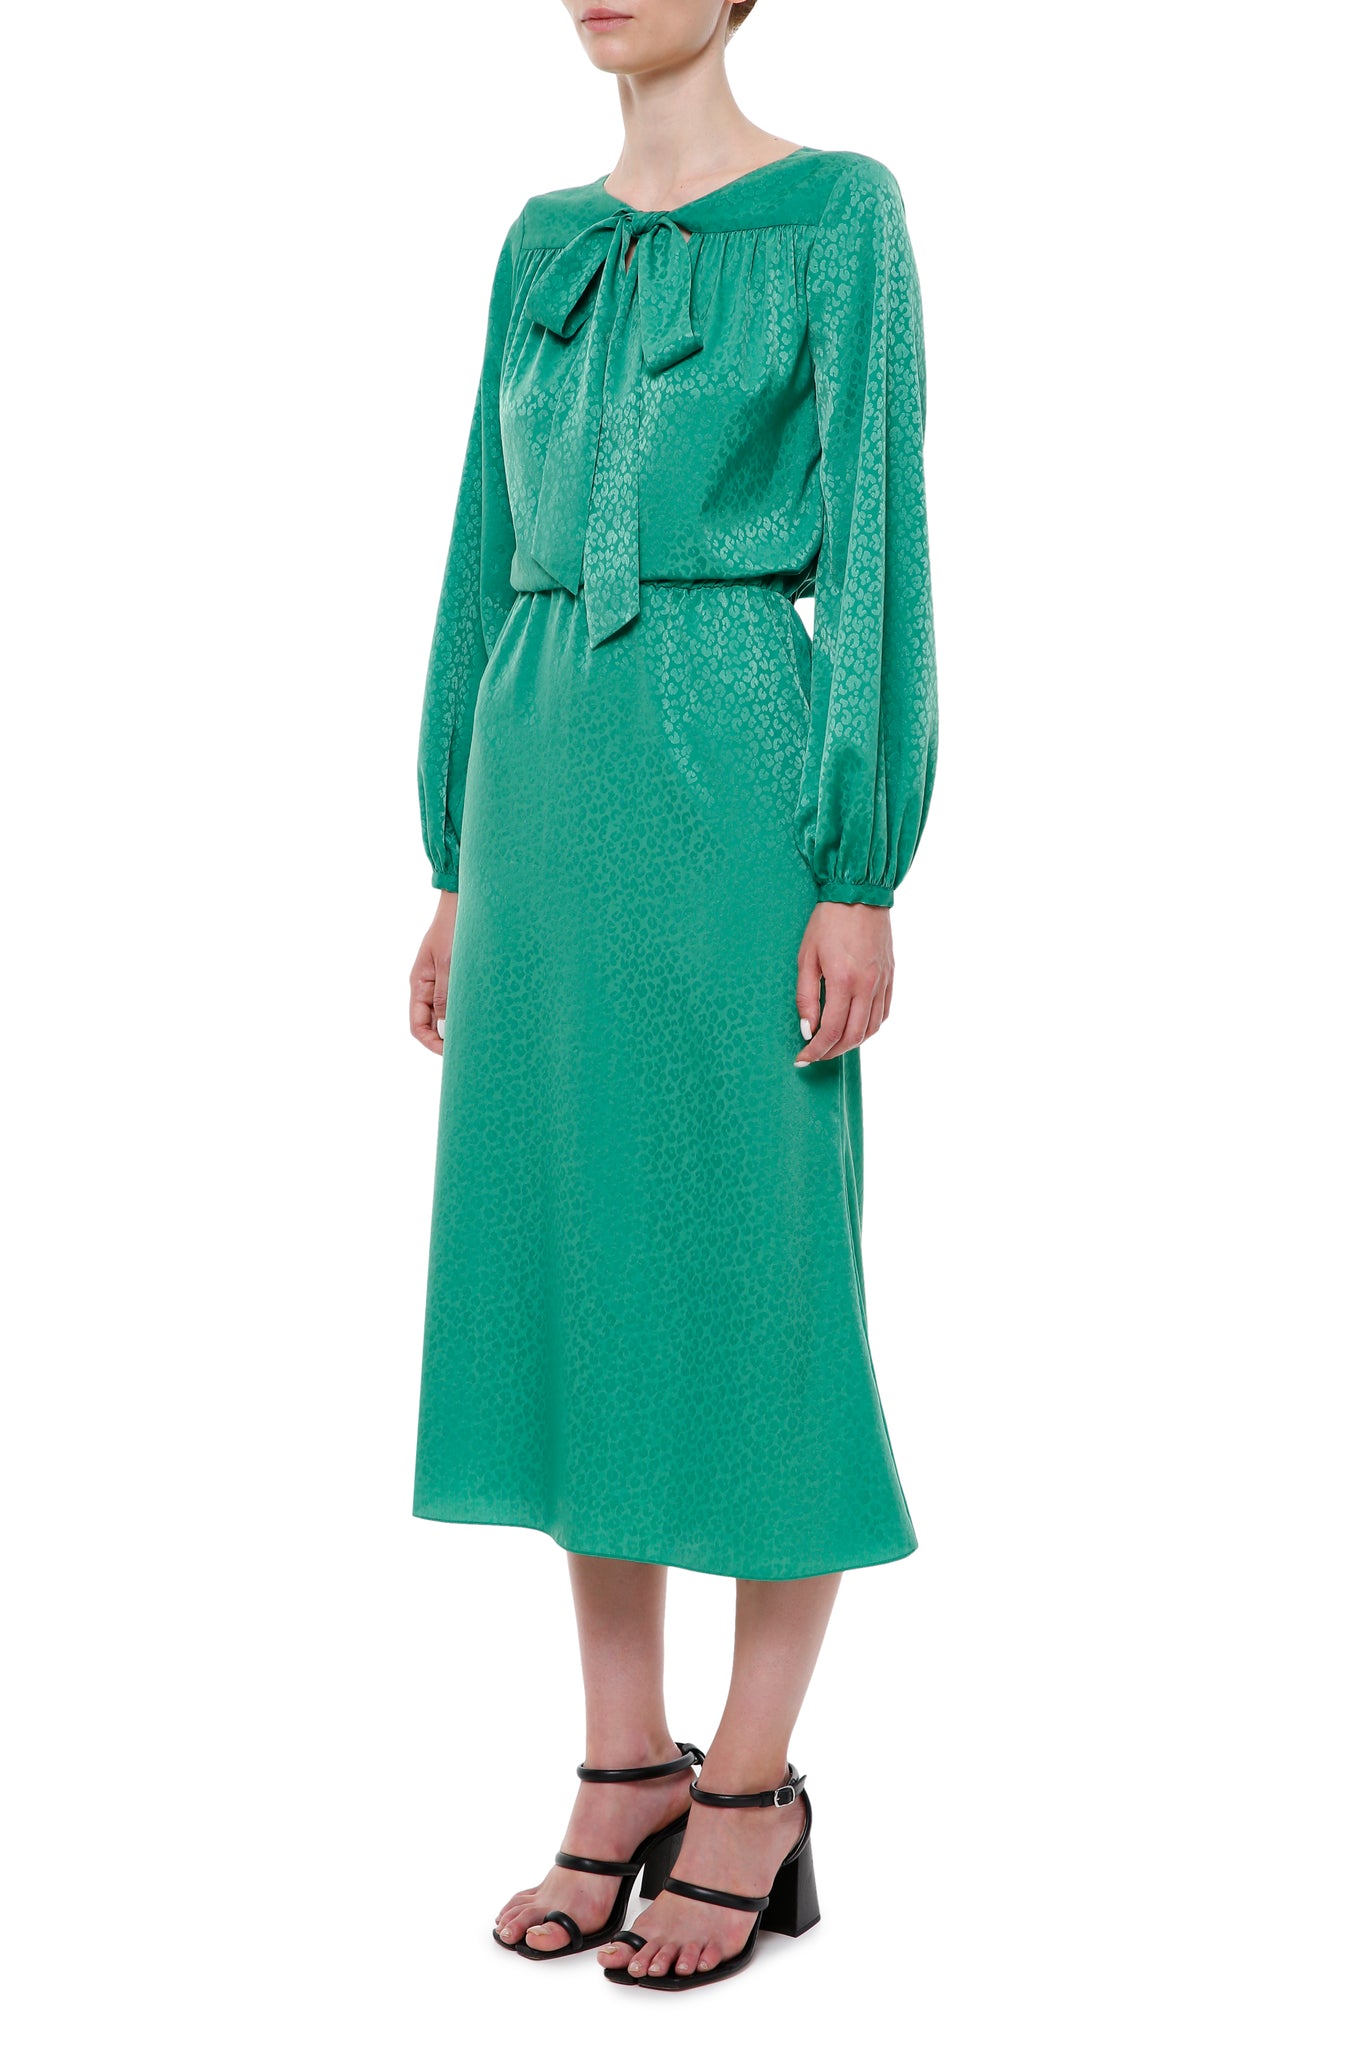 Green jacquard dress with ties on the neck